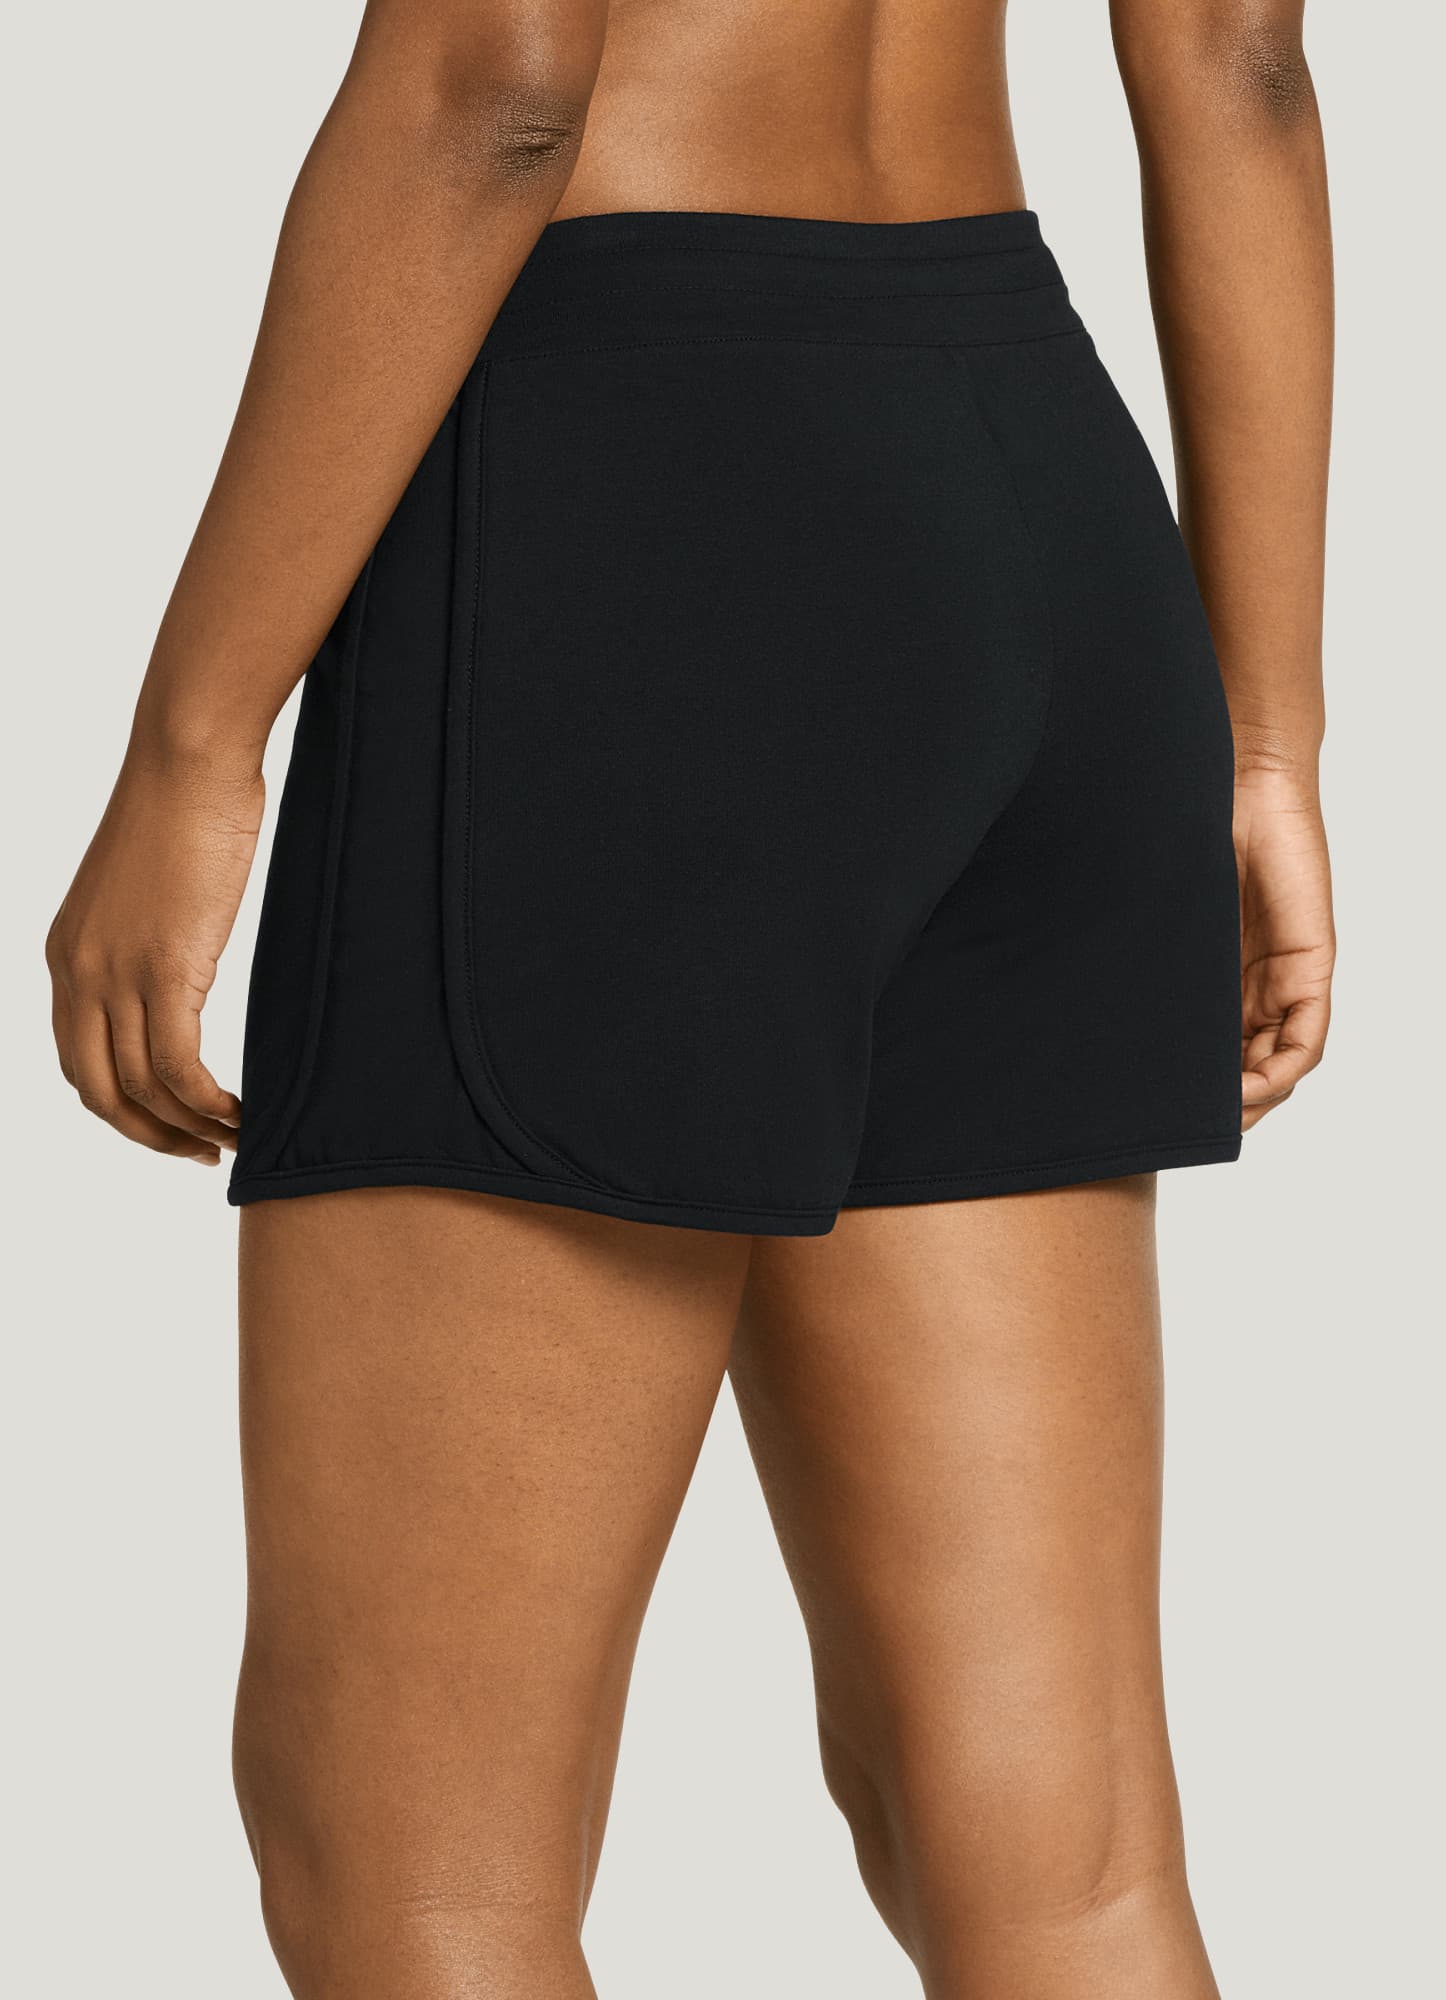 Mey Serie Dry Cotton (B) Shorty BLACK buy for the best price CAD$ 53.00 -  Canada and U.S. delivery – Bralissimo